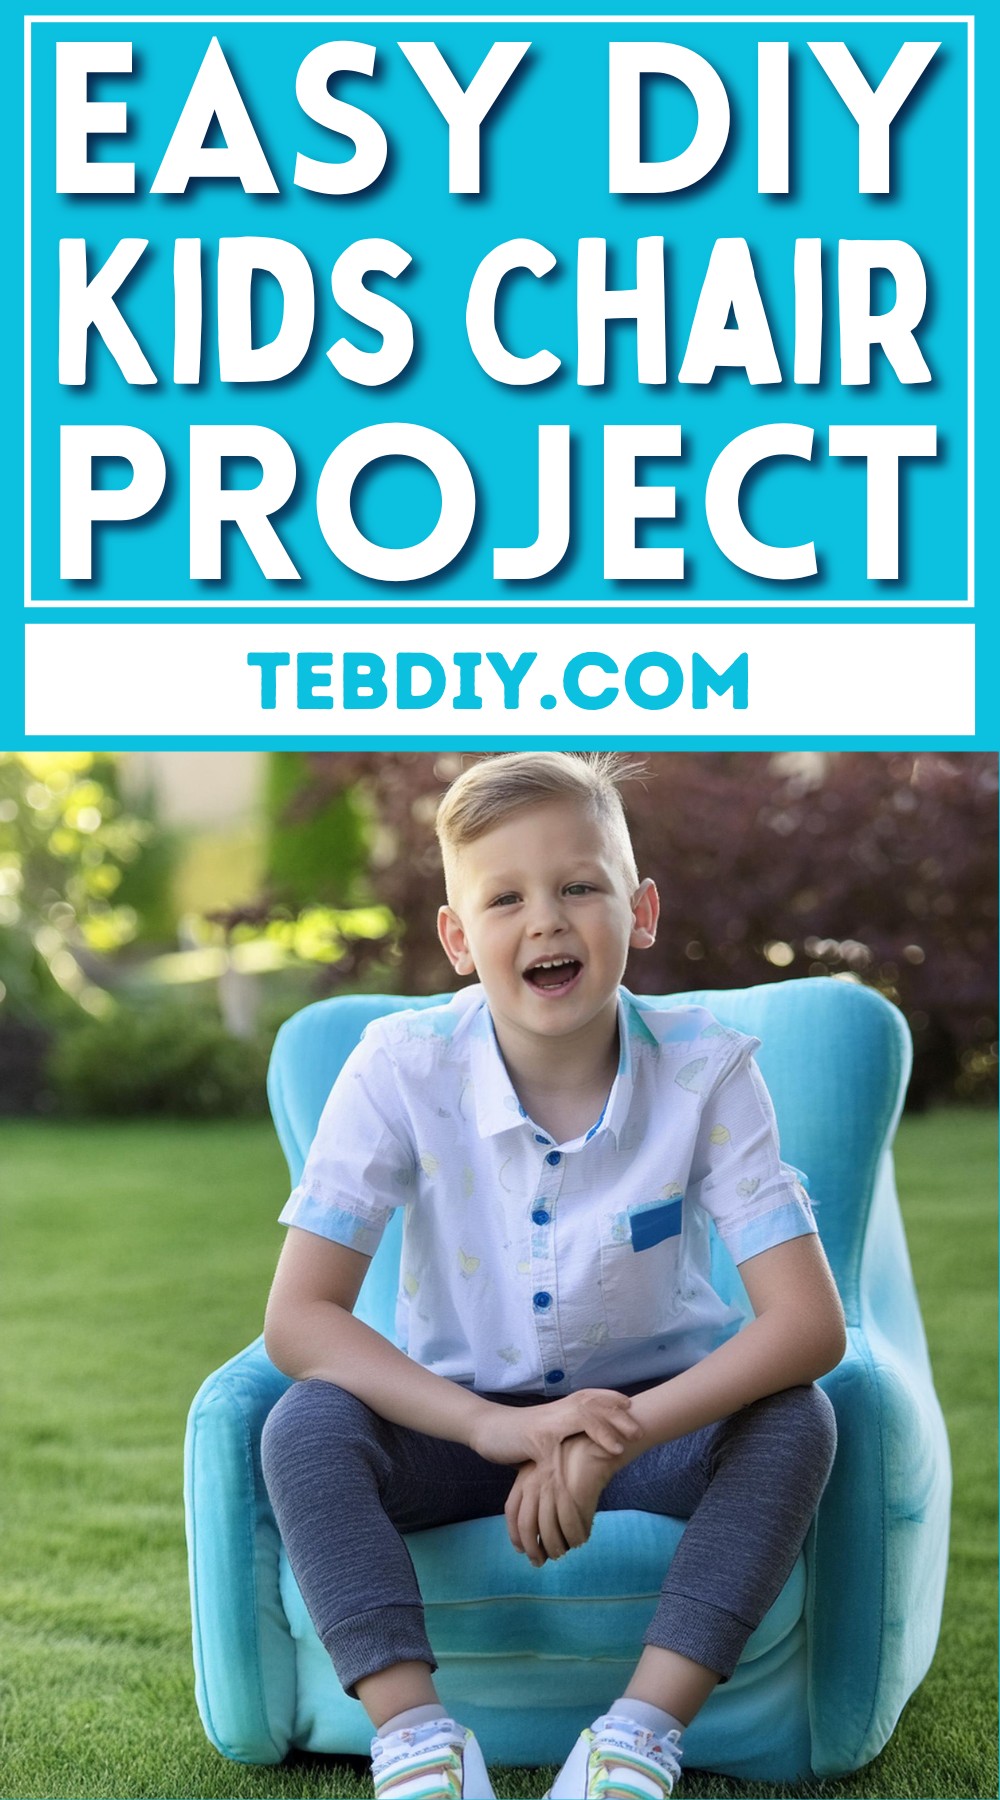 DIY Kids Chair Project